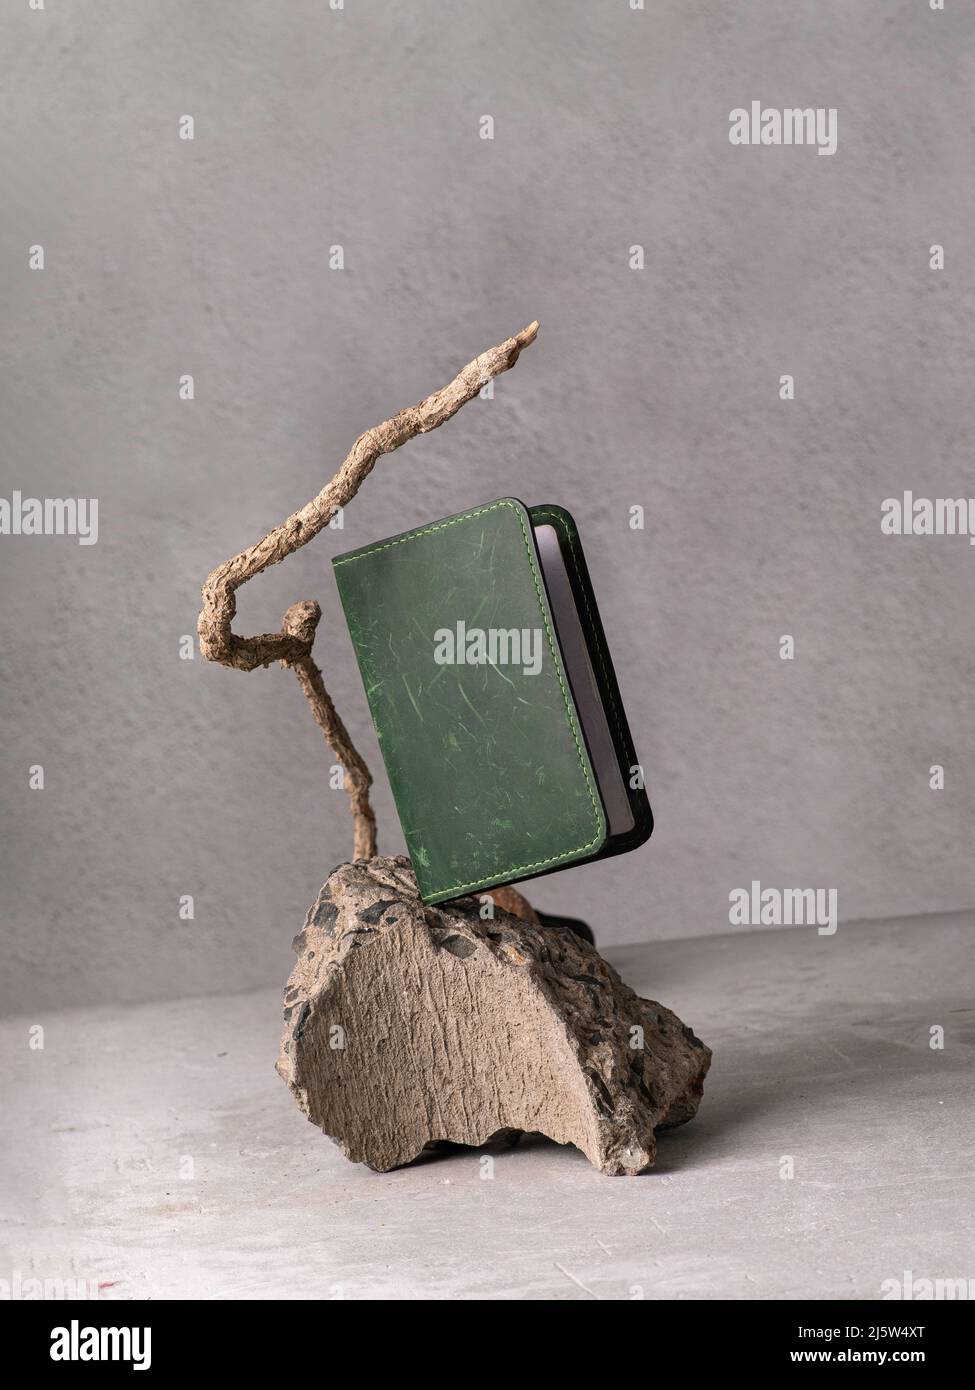 Green leather document cover on grey stone as podium Stock Photo